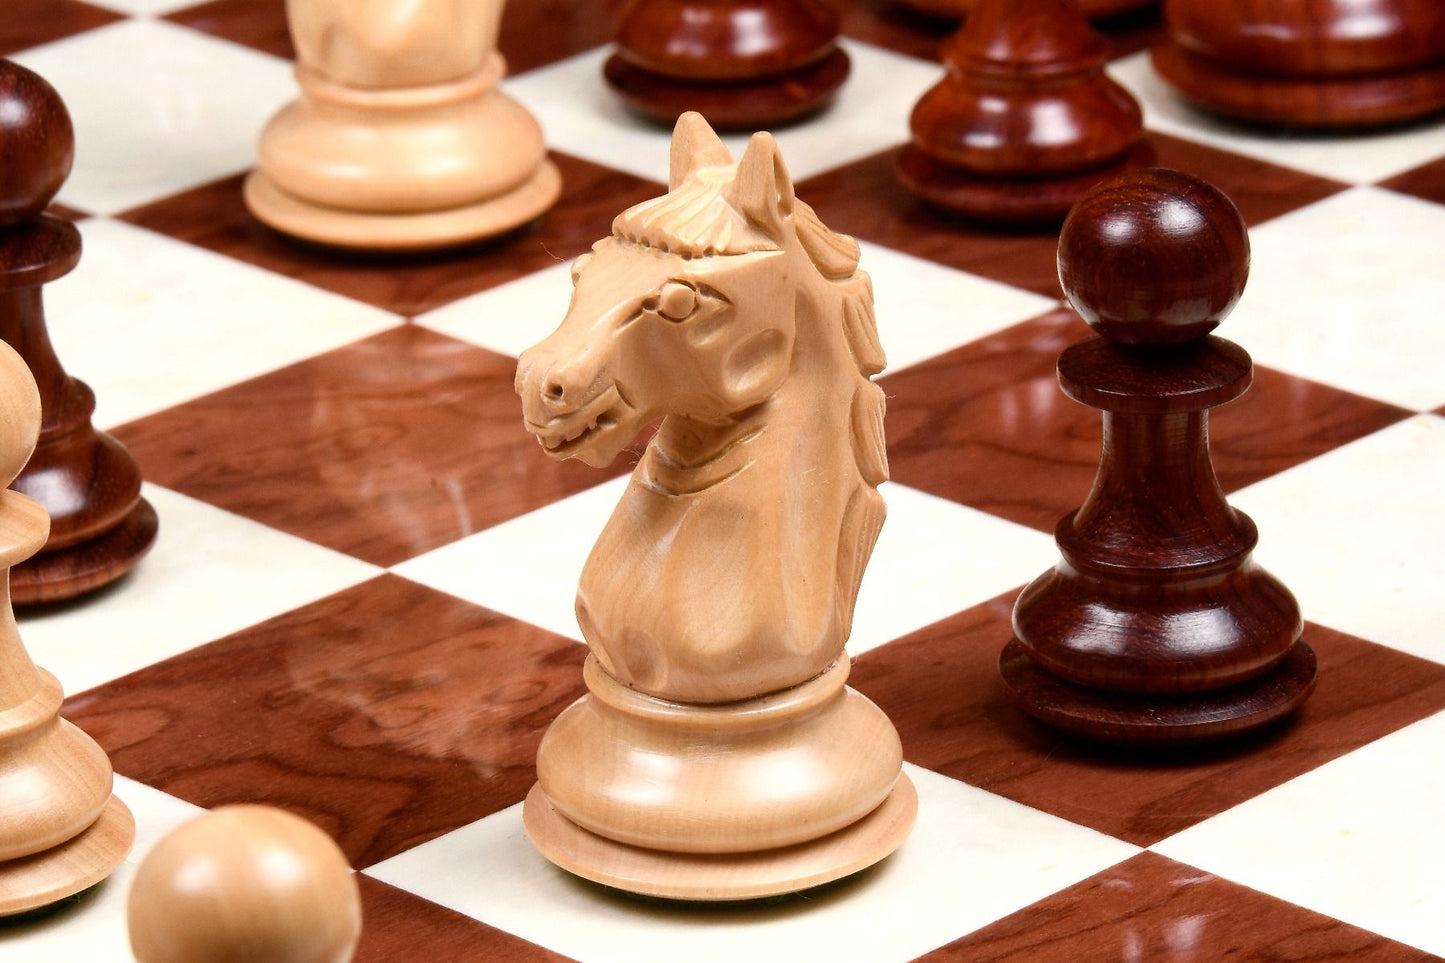 Alban Series Chess Pieces in Bud Rosewood/Boxwood - 4.0" King with Board